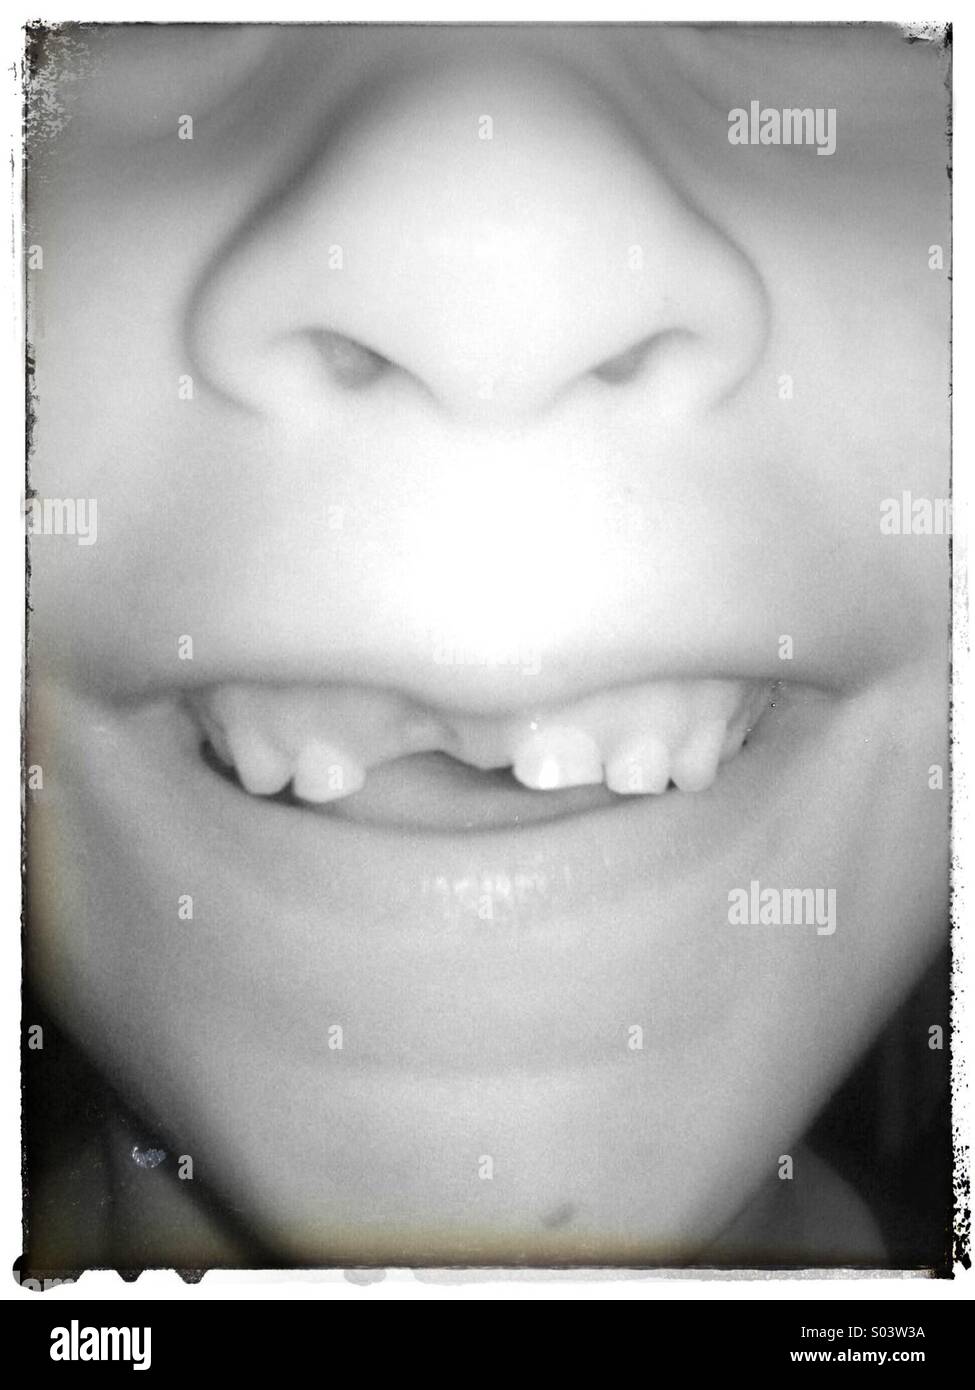 Child with missing tooth. Stock Photo